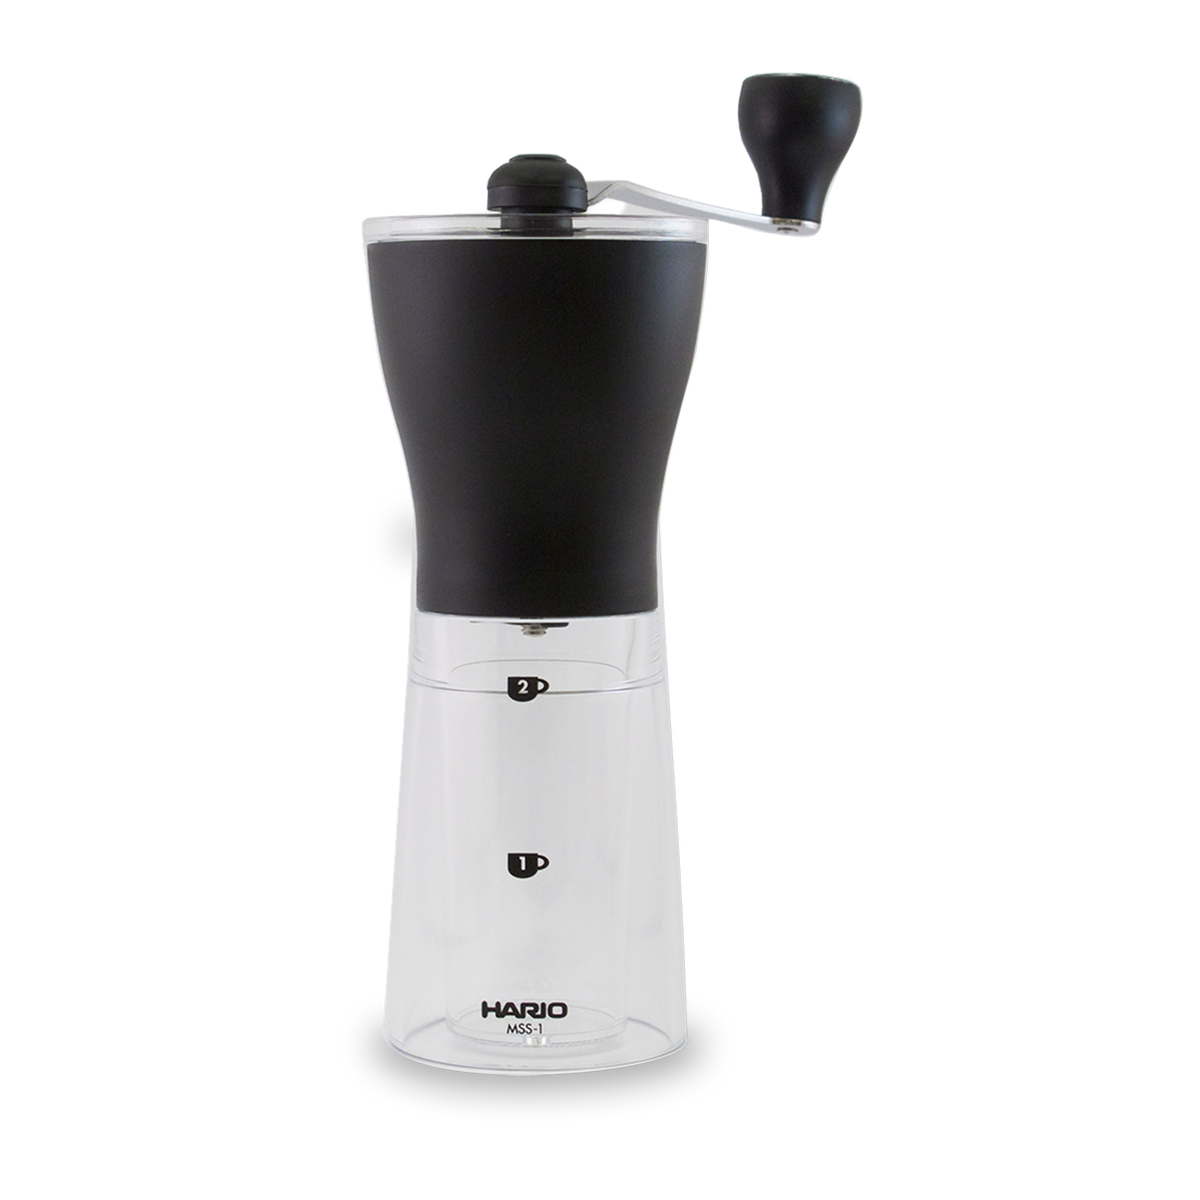 Adjustable Coffee Bean Mills, Brewing Grinders for Office Home